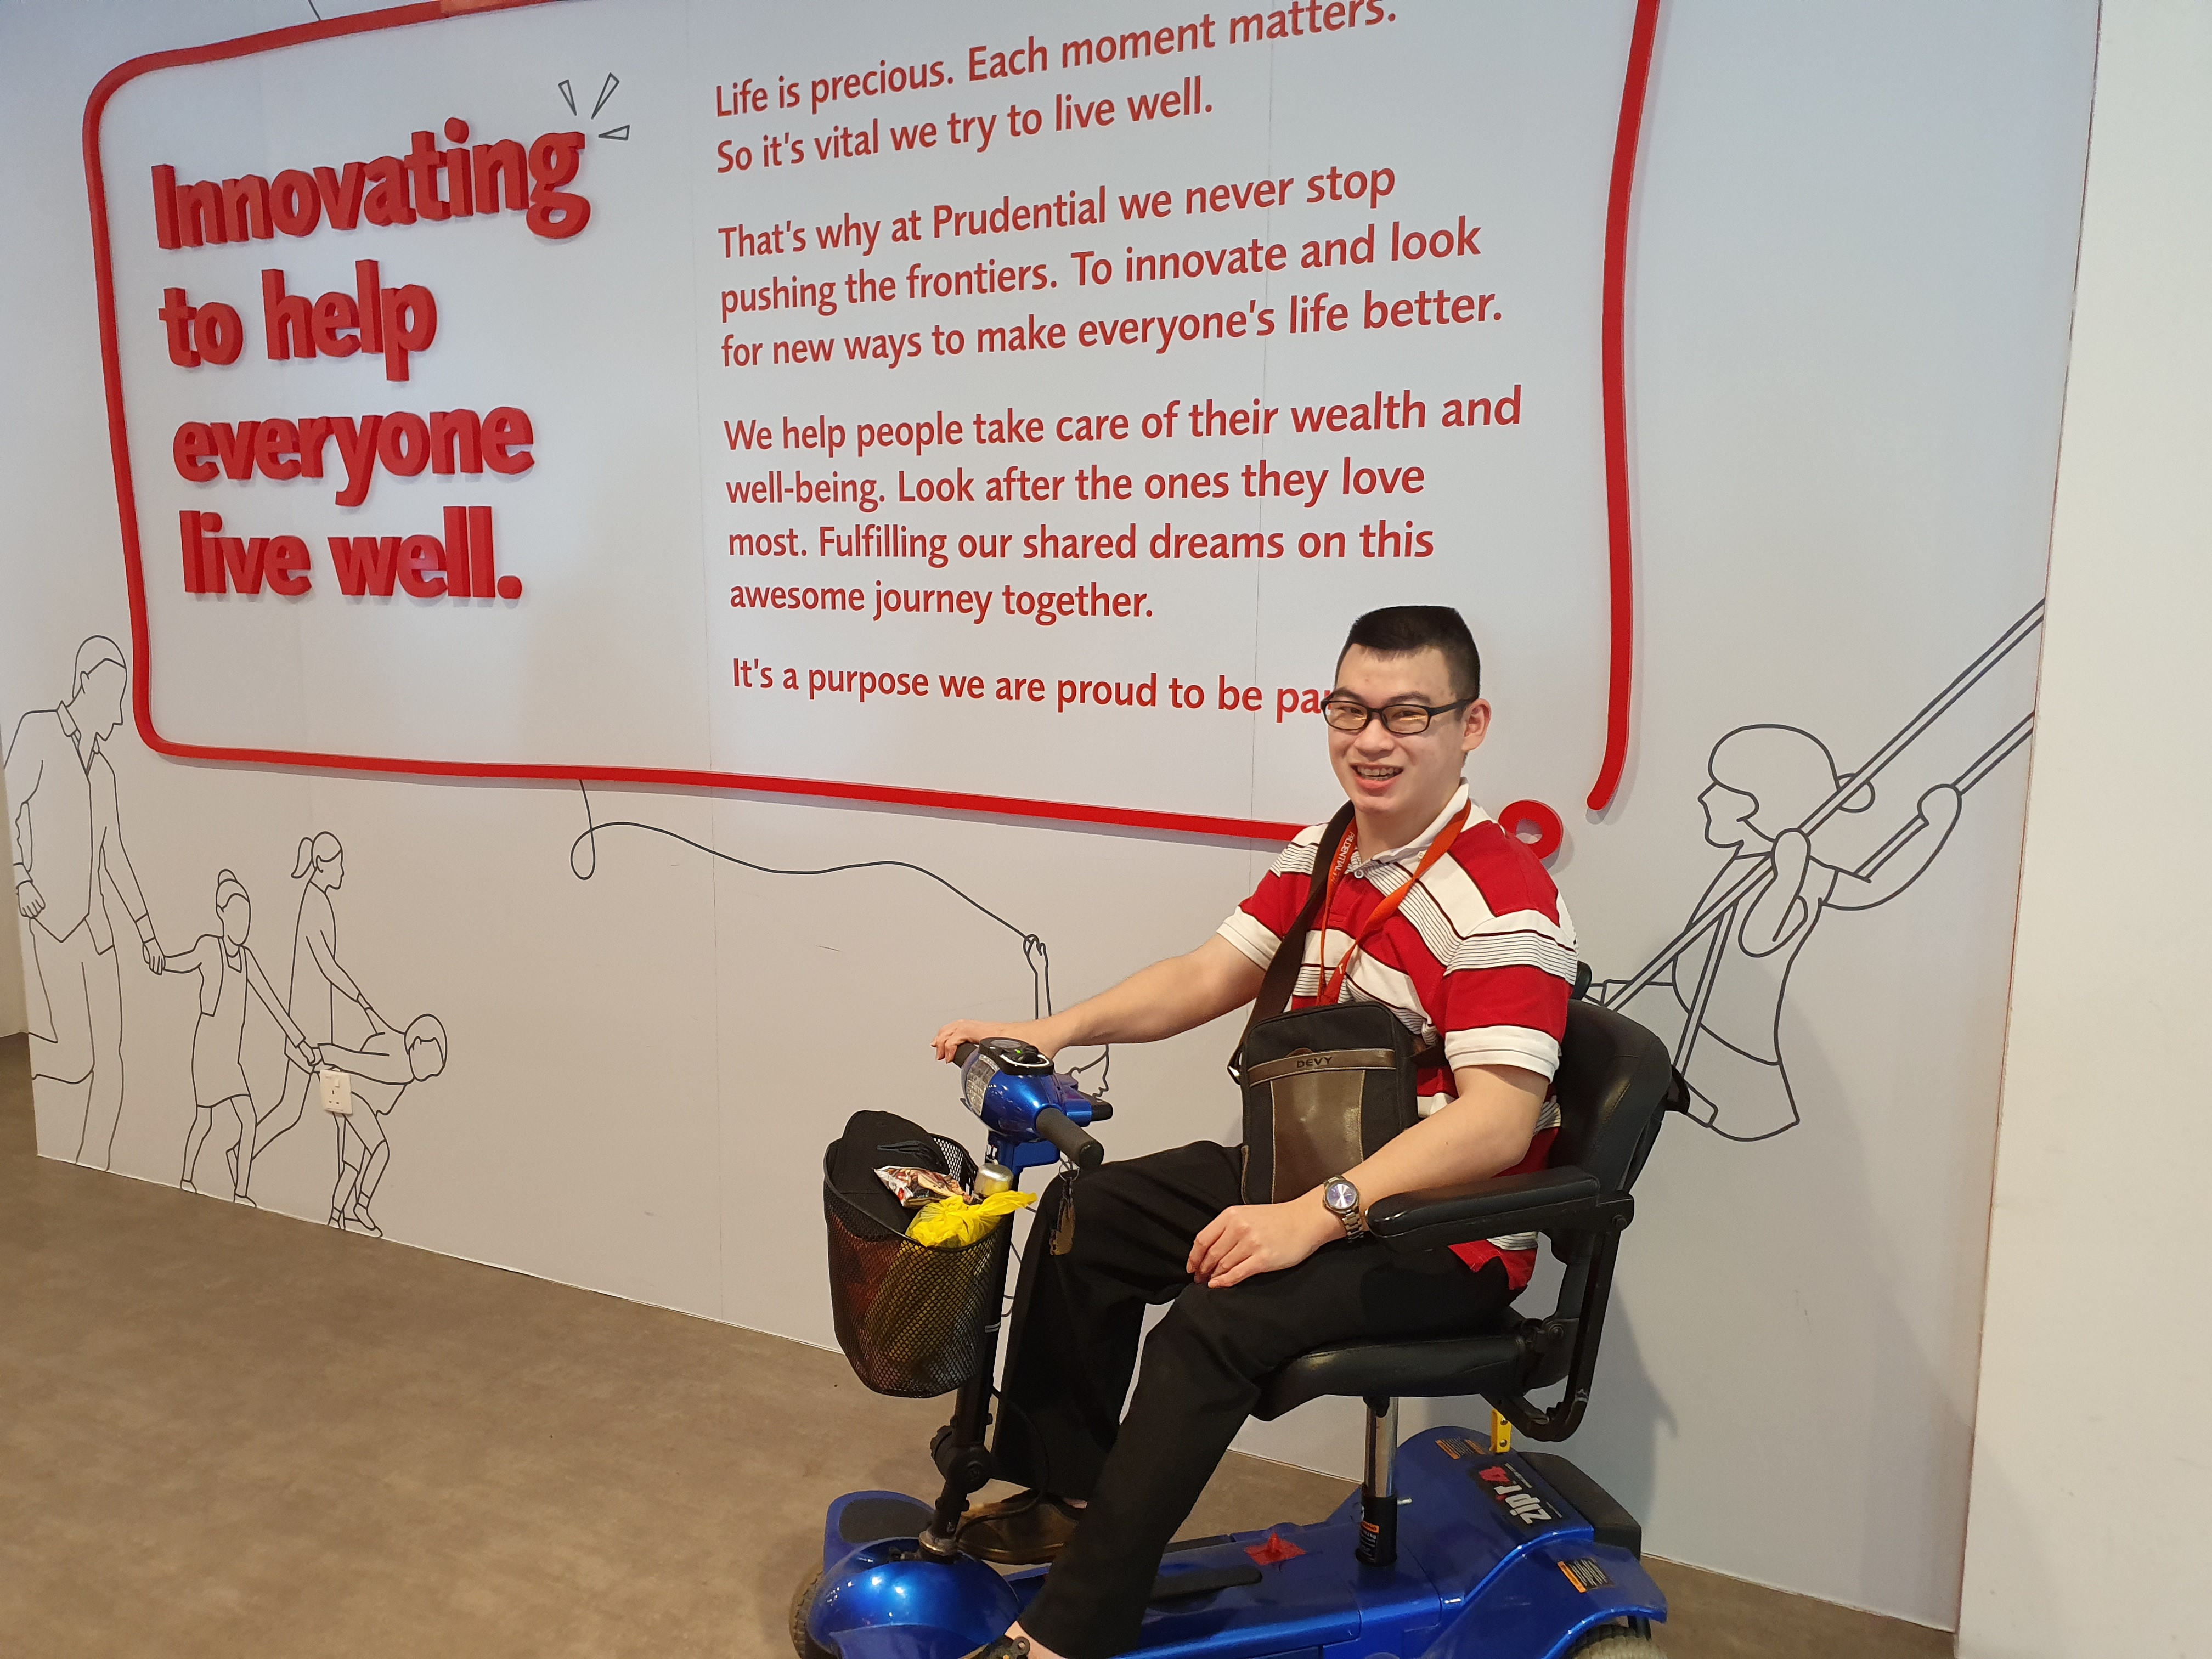 A bespectacled man on a motorised wheelchair in front of a Prudential-branded wall smiles for the camera.